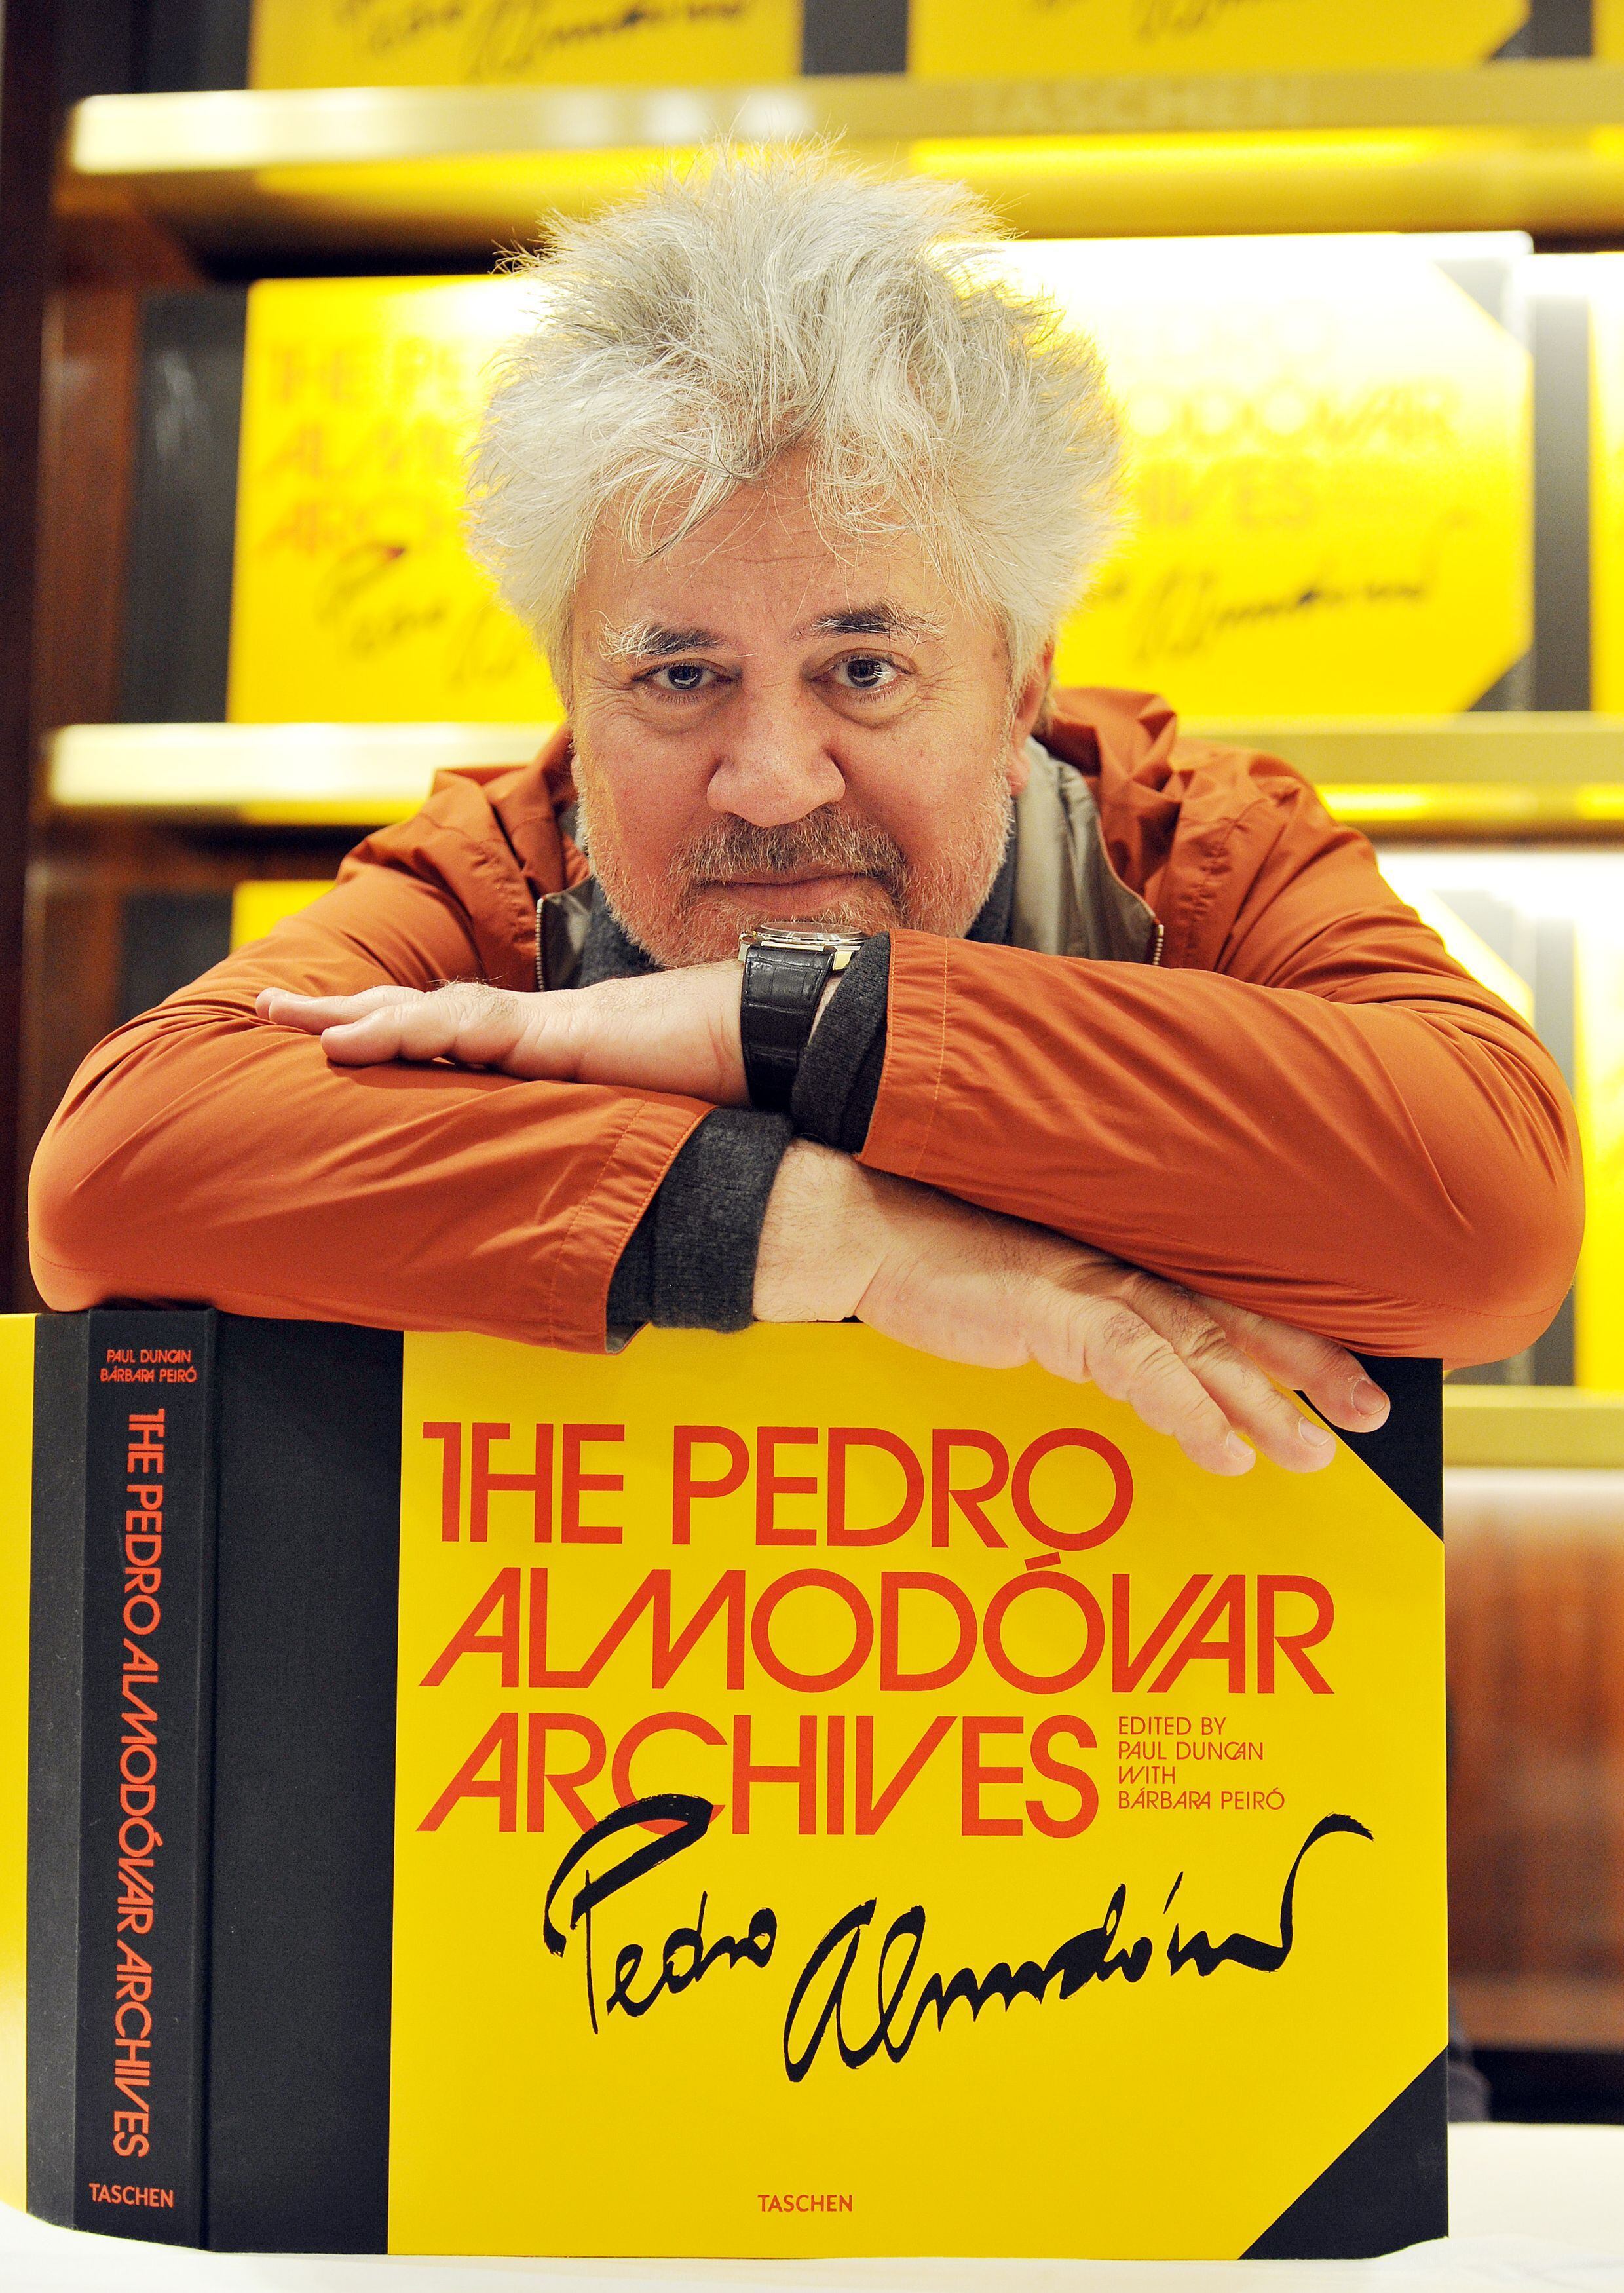 Spanish Film Director Pedro Almodovar at a book store in Chelsea, west London, where he signed copies of his book "The Pedro Almodovar Archives", Saturday, Nov. 17, 2012. (AP Photo/PA, John Stillwell)  UNITED KINGDOM OUT  NO SALES  NO ARCHIVE